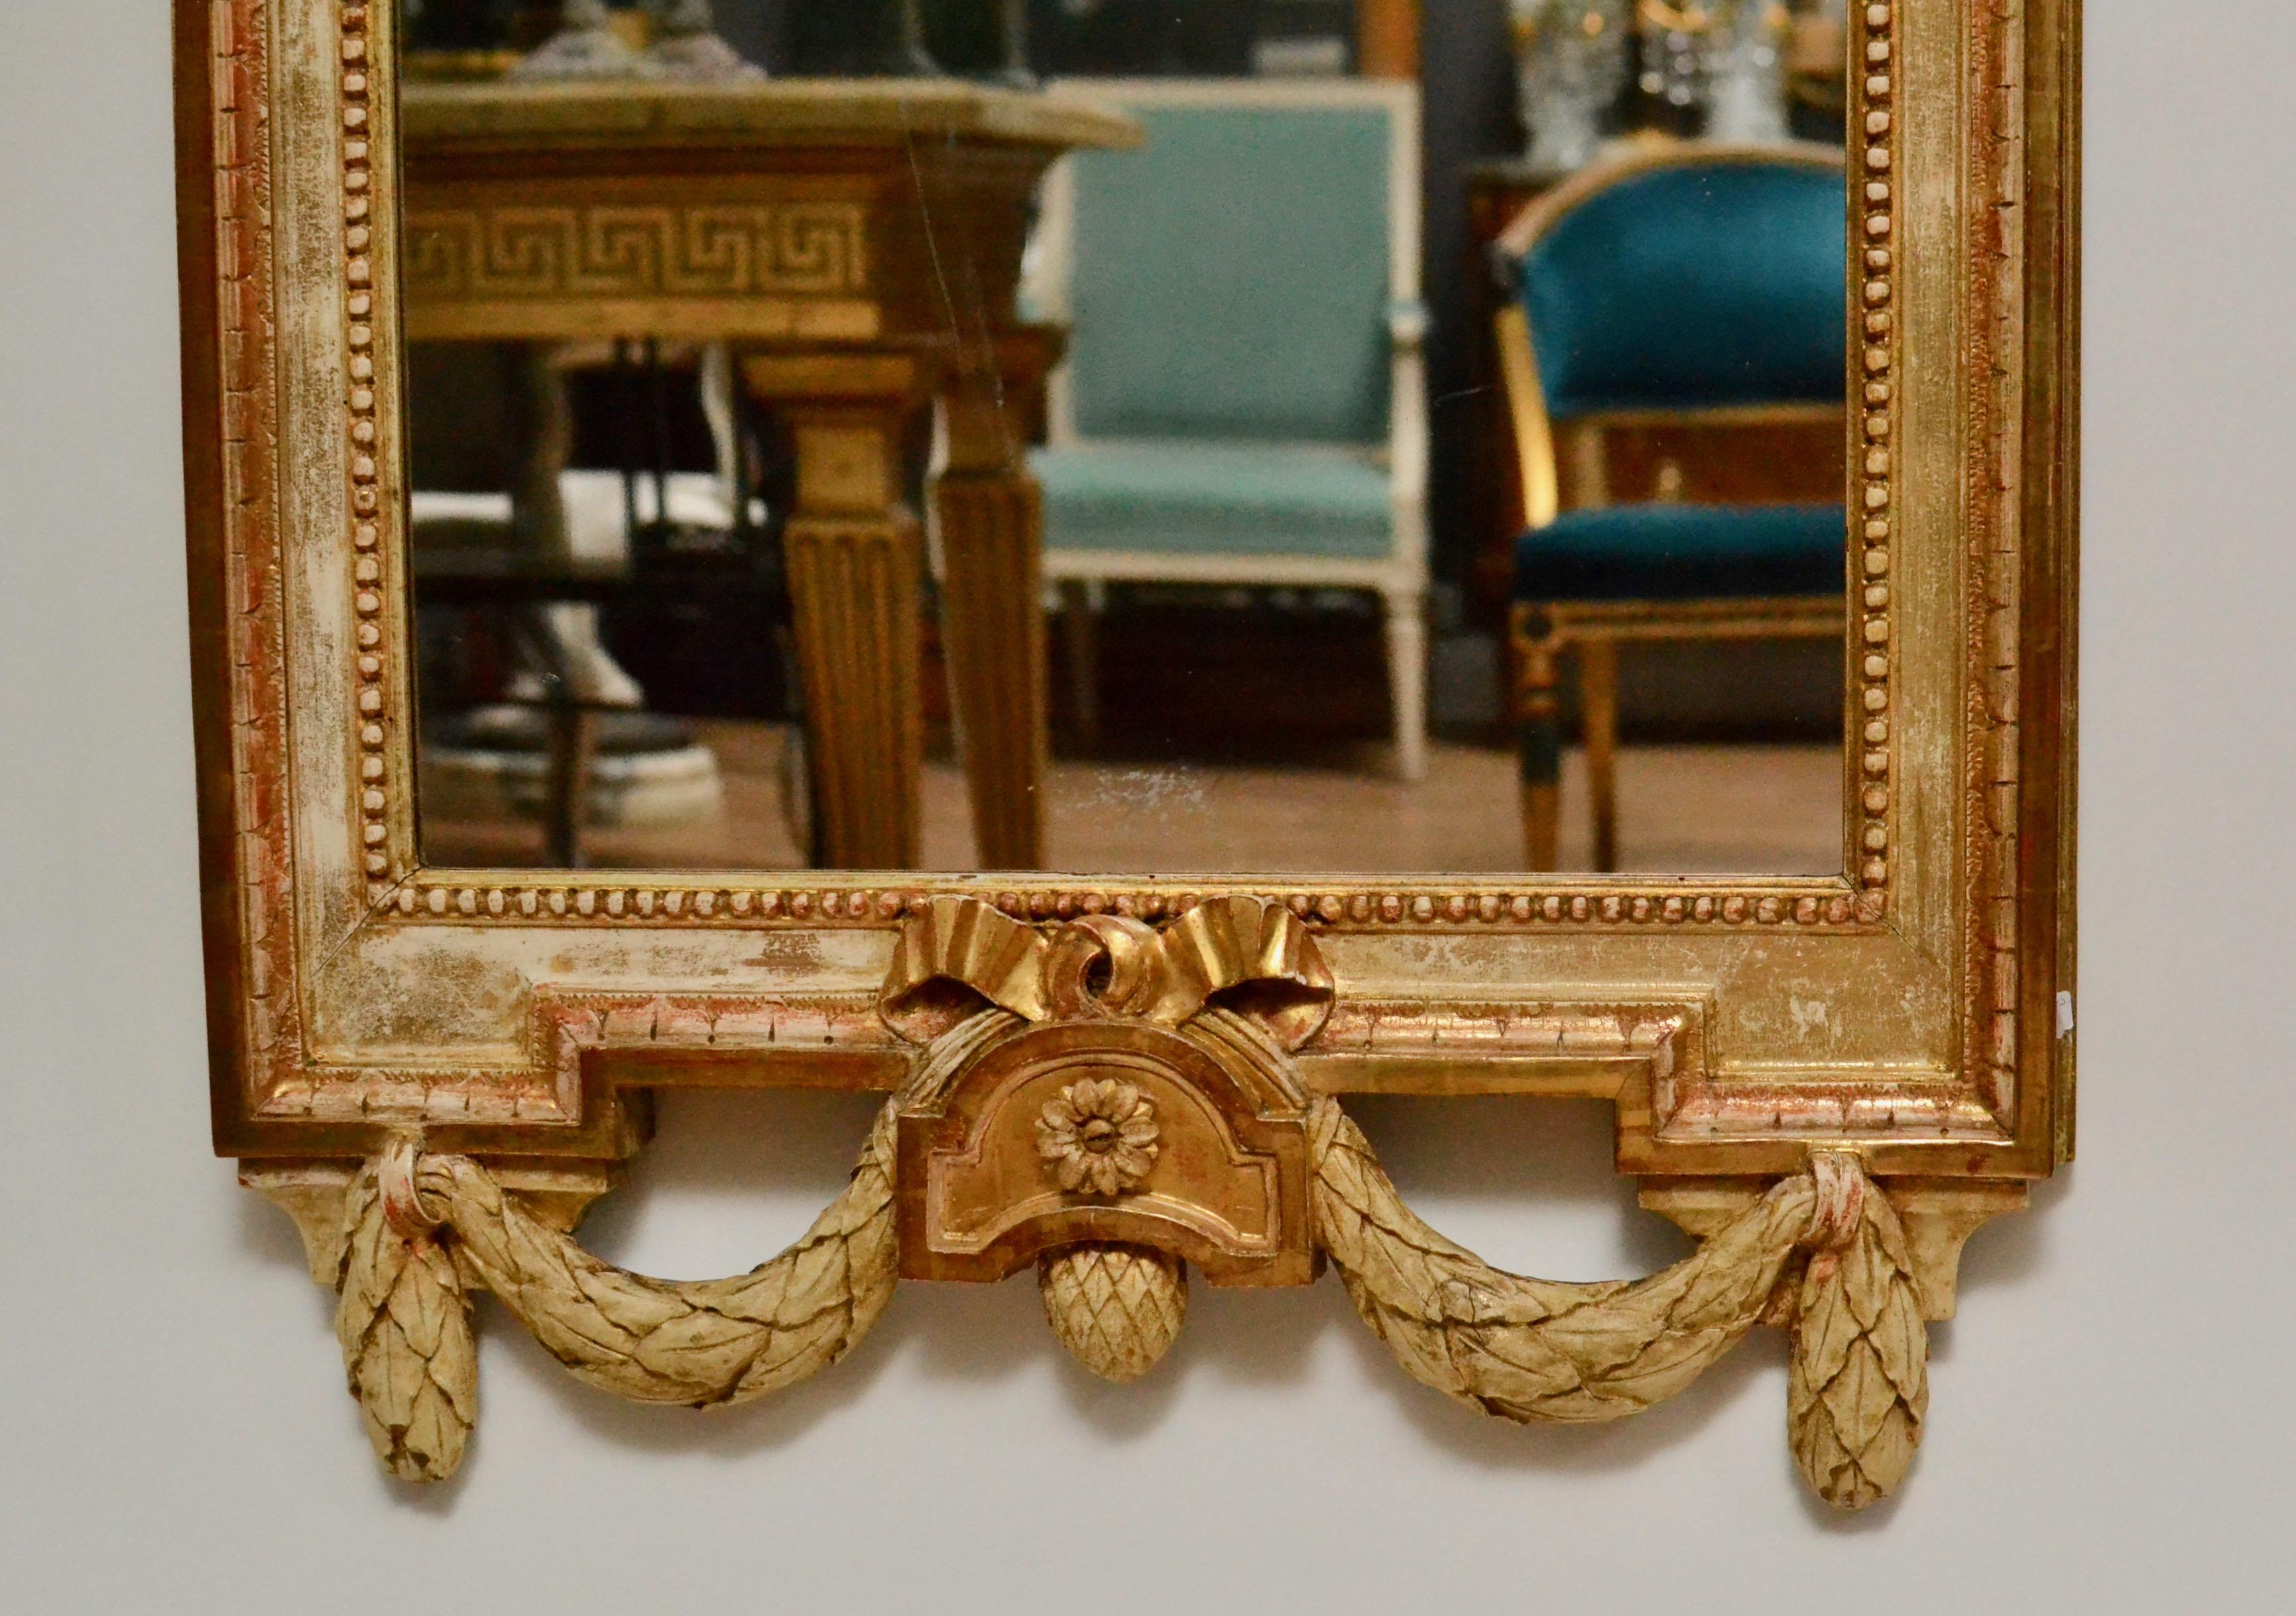 Gustavian wood carved giltwood mirror by Johan åkerblad (master 1758-1799). Signed IÅ and AÖB, Anders Öberg (Working with Åkerblad 1781-1799. 56. Stockholm 1758-1799). Stamped with the mirror makers guild STOCKHOLM and date 1781. Unusual model with